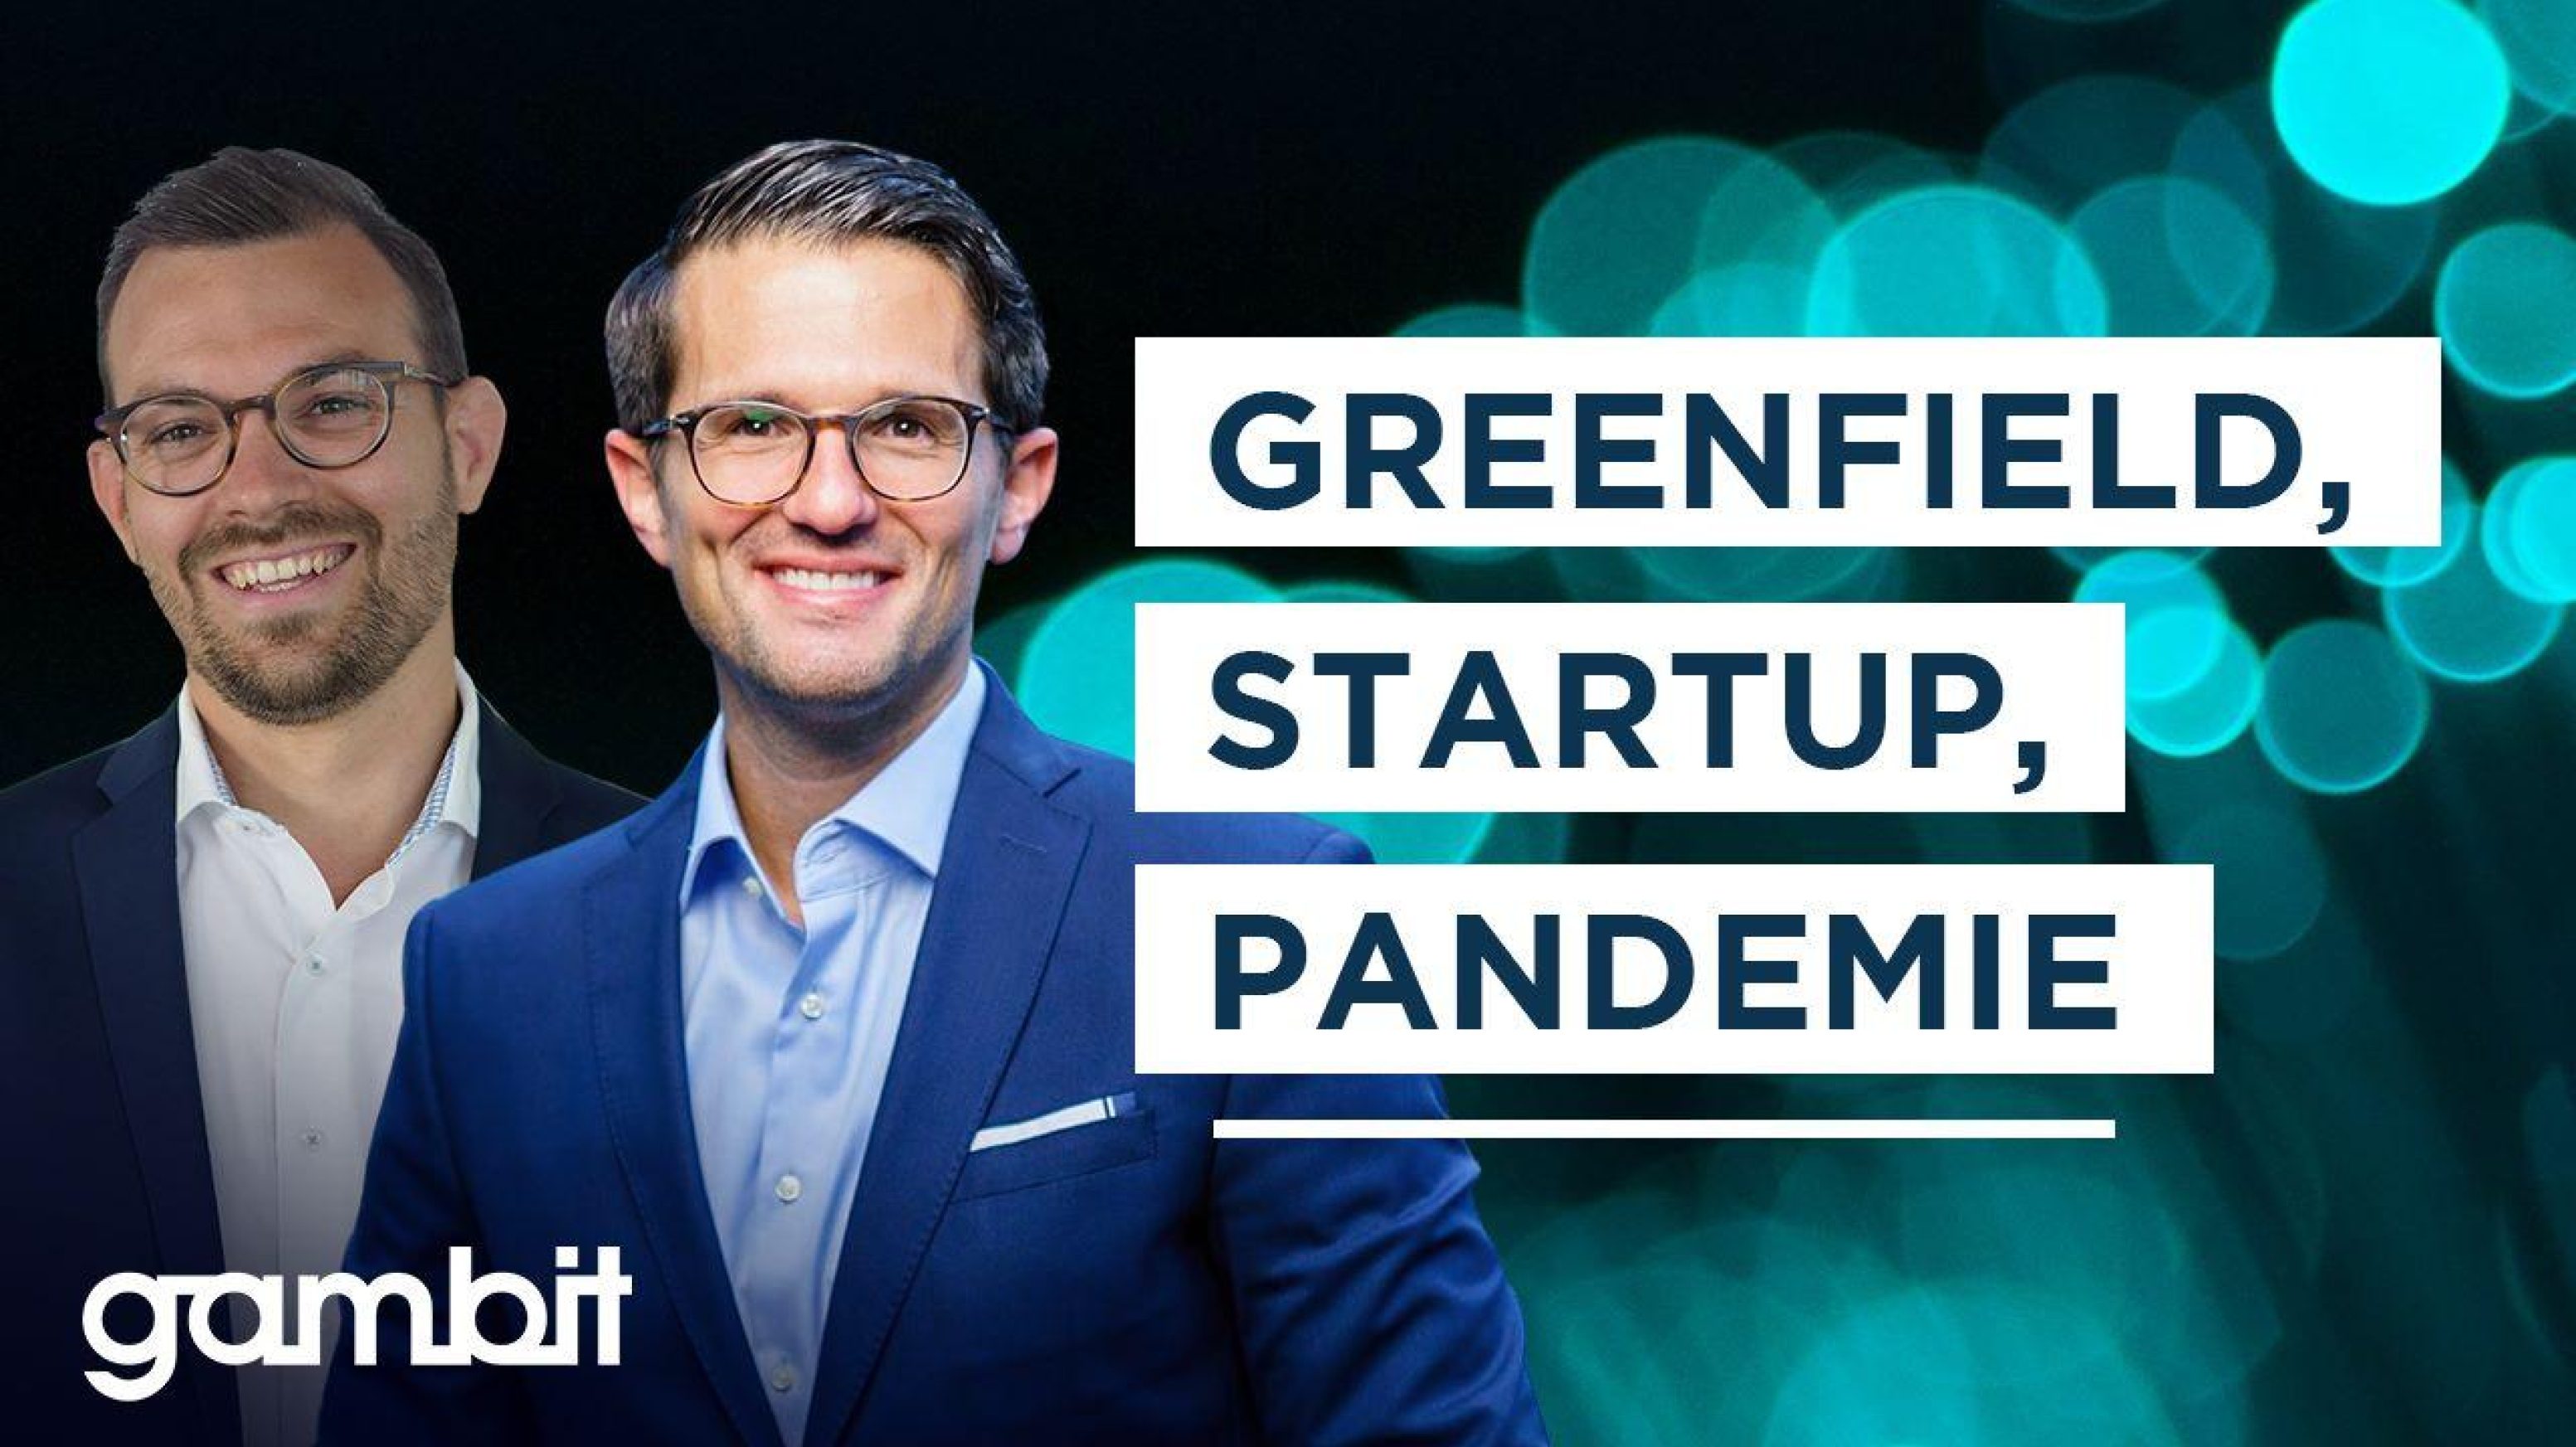 Thumbnail 1280x720px S4 H Insight2022 Greenfield Startup Pandemie